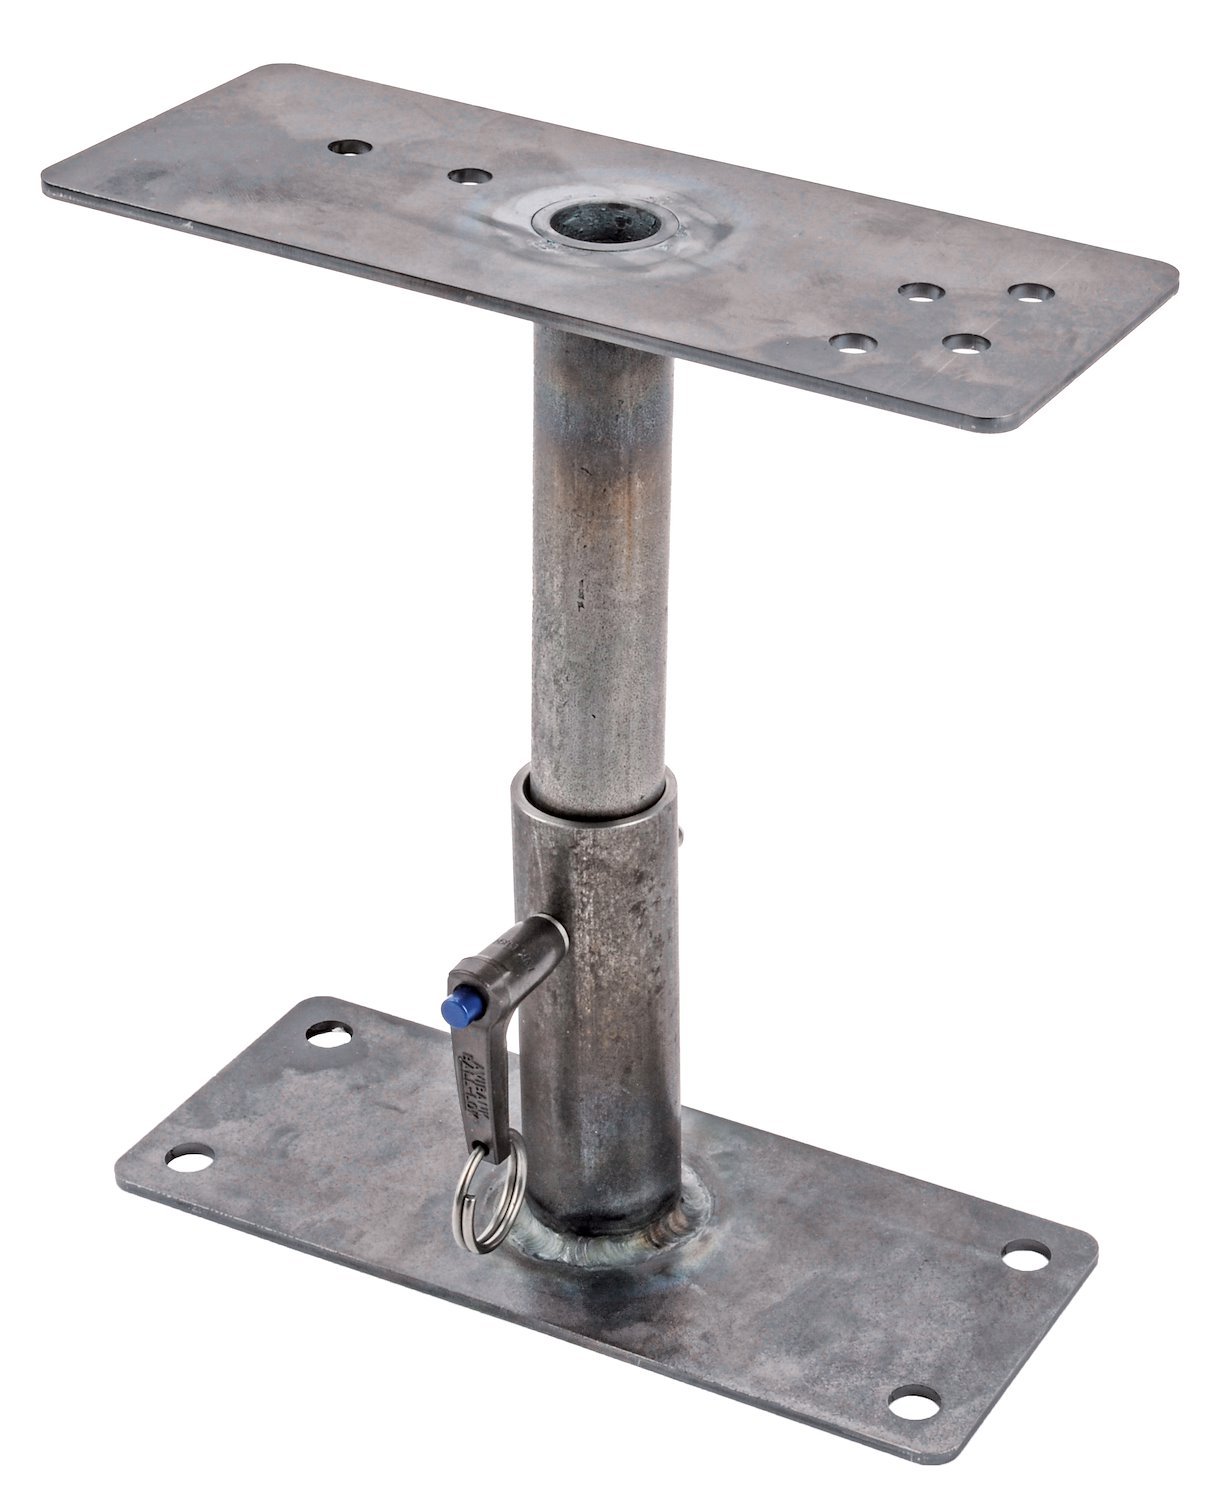 Shifter Pedestal Adjustable from 4" to 8-1/4" (some fabrication required)